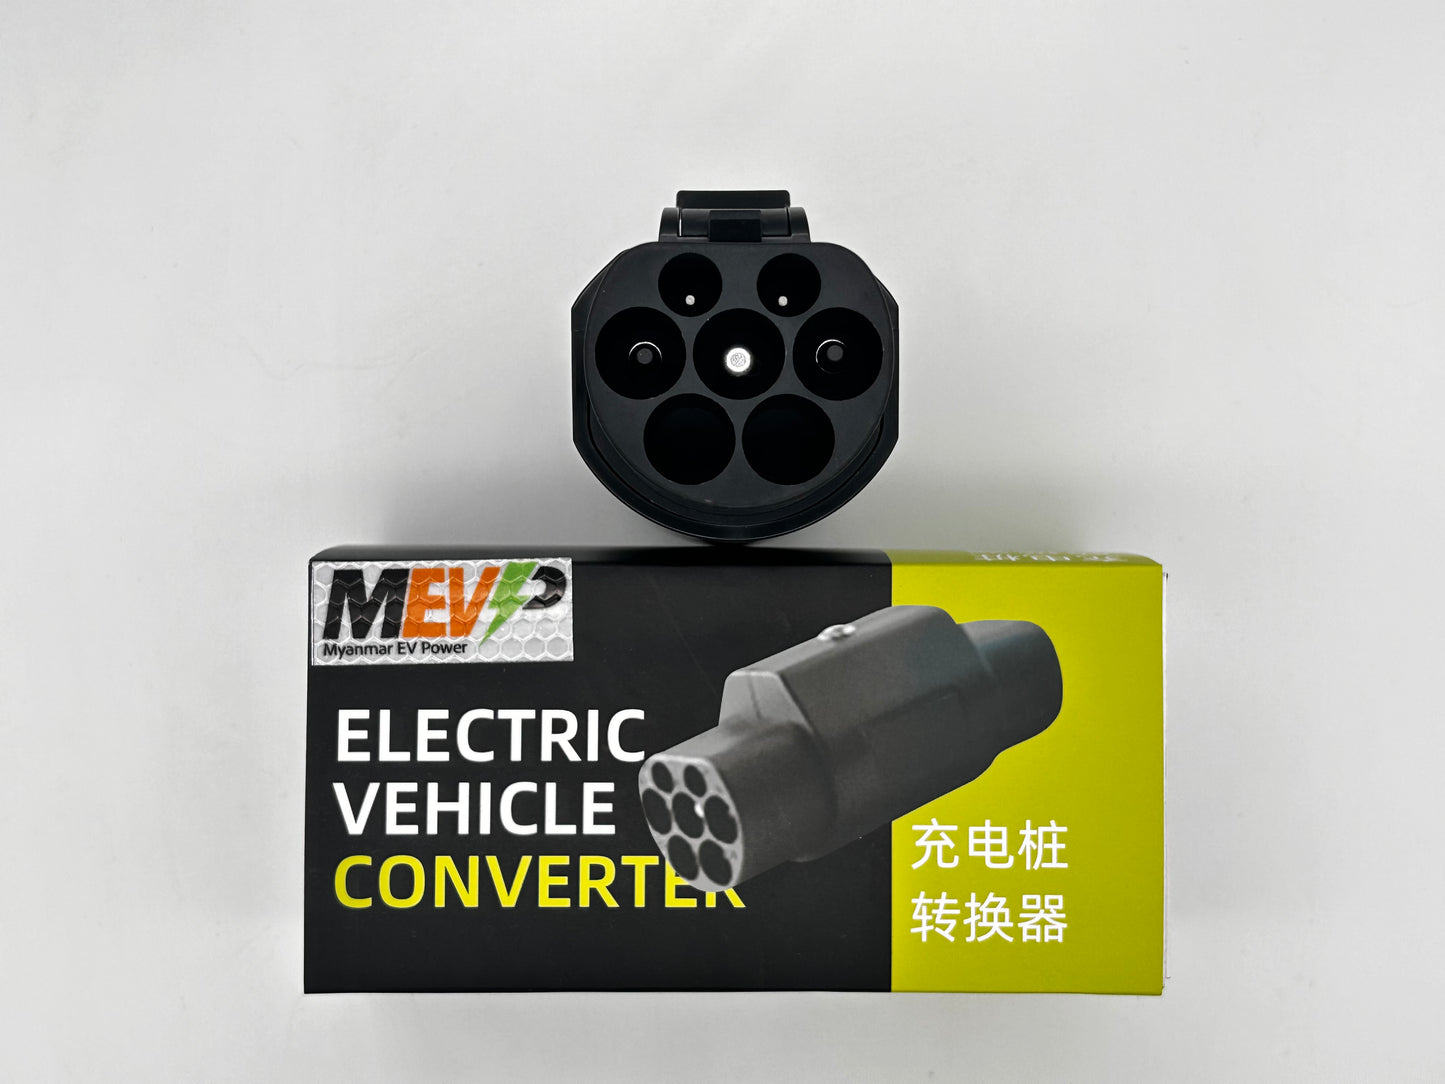 TYPE 2 TO GB/T (220V) EV ADAPTERS